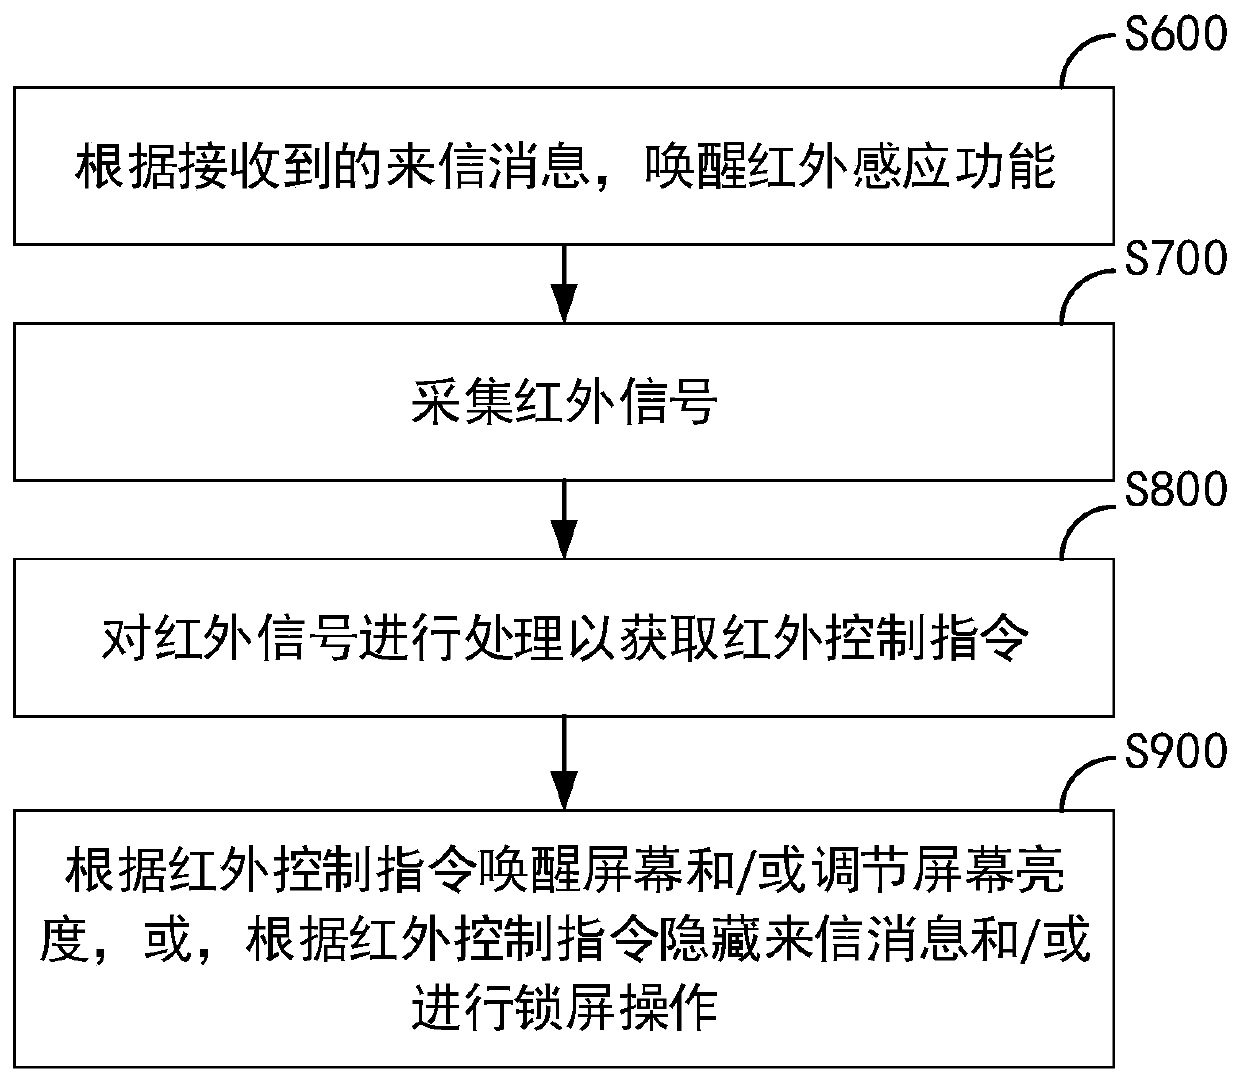 Message processing method and device, storage medium and electronic equipment